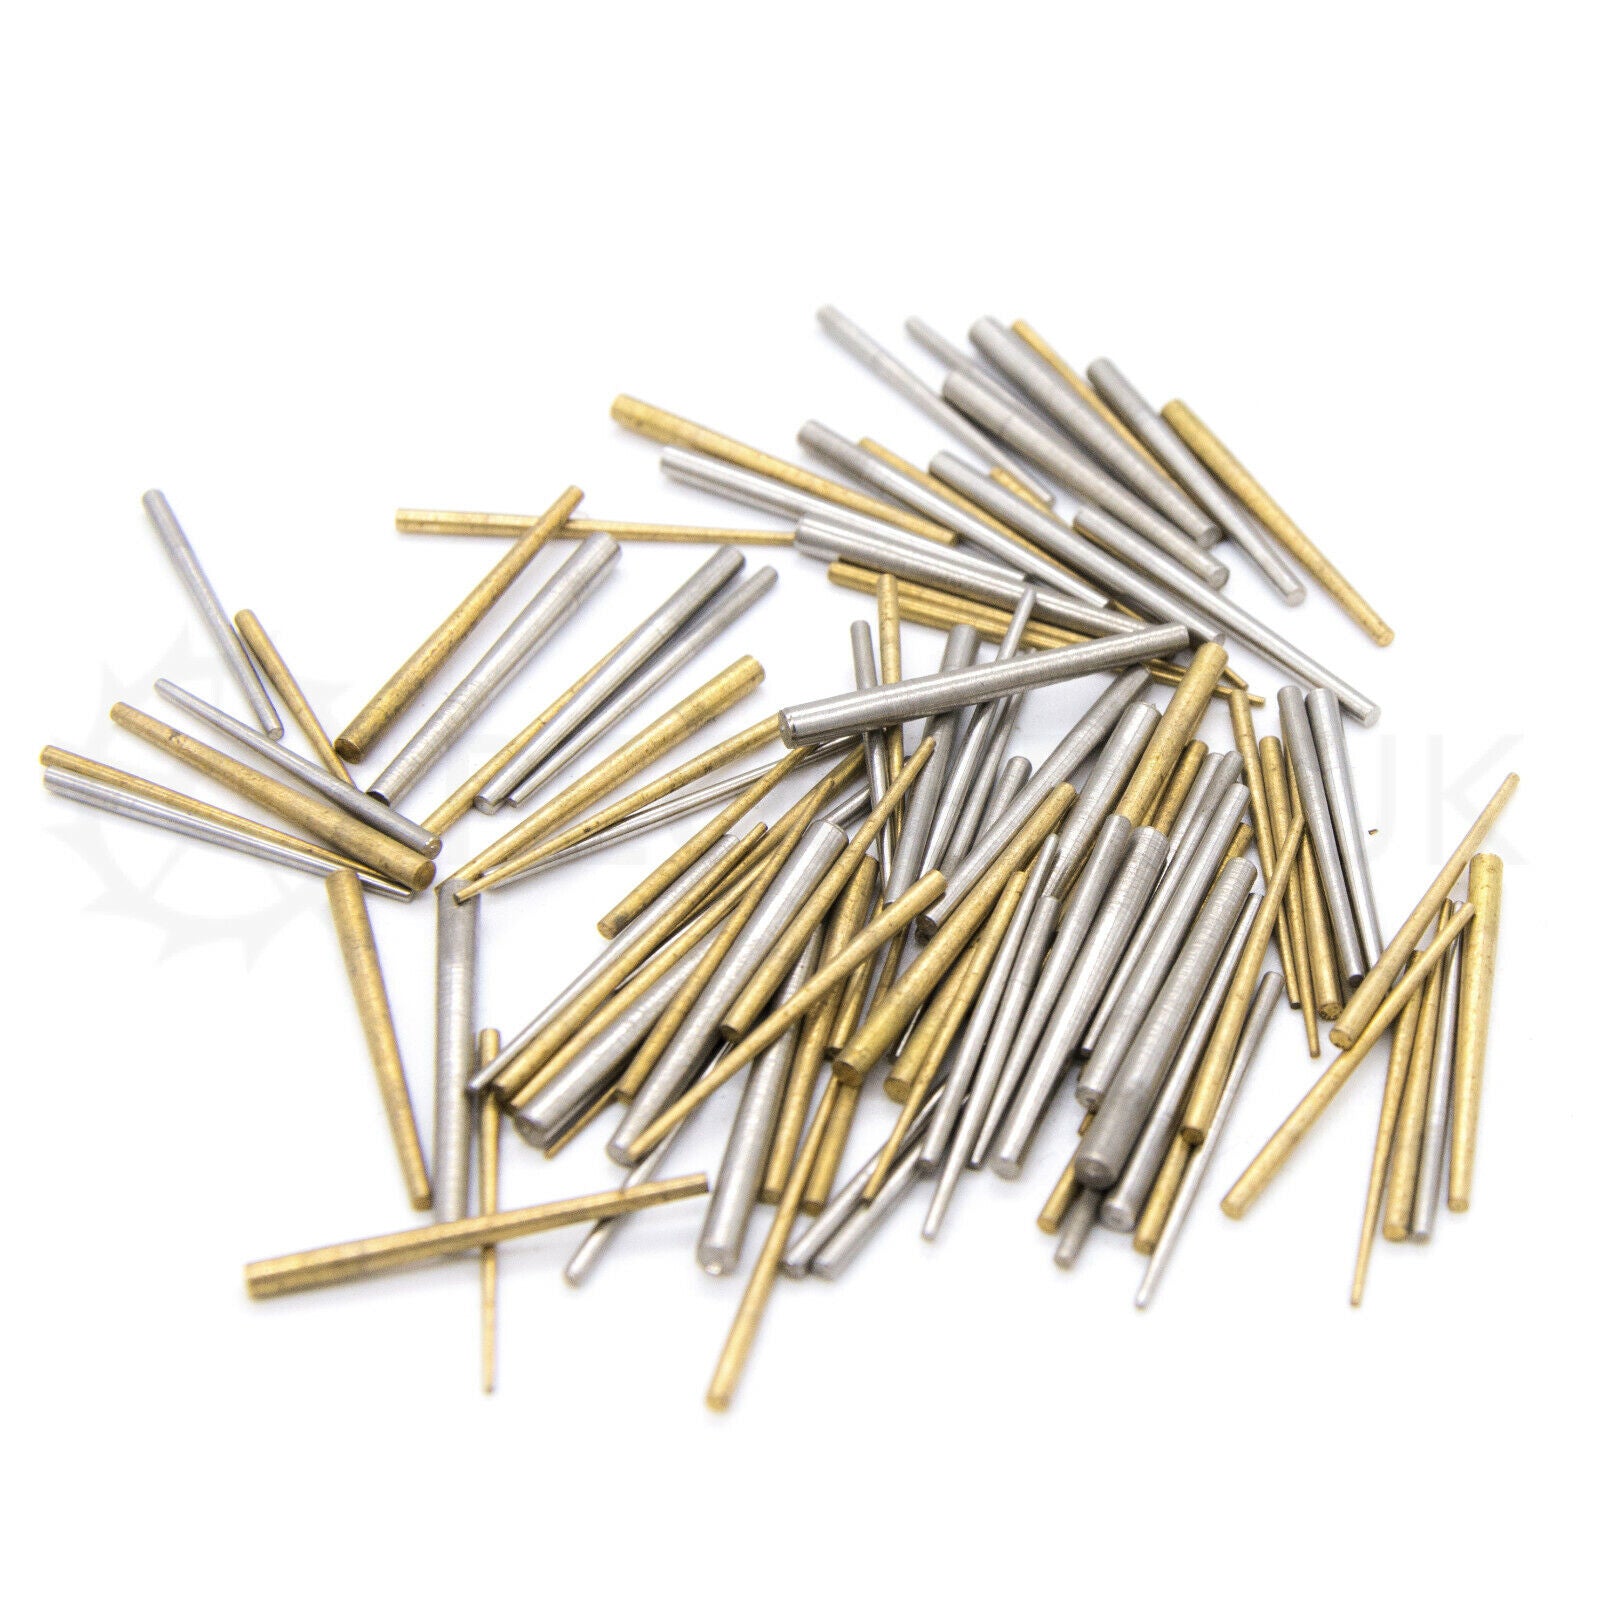 100 x Steel & Brass Clock tapered pins - Assorted mixed sizes